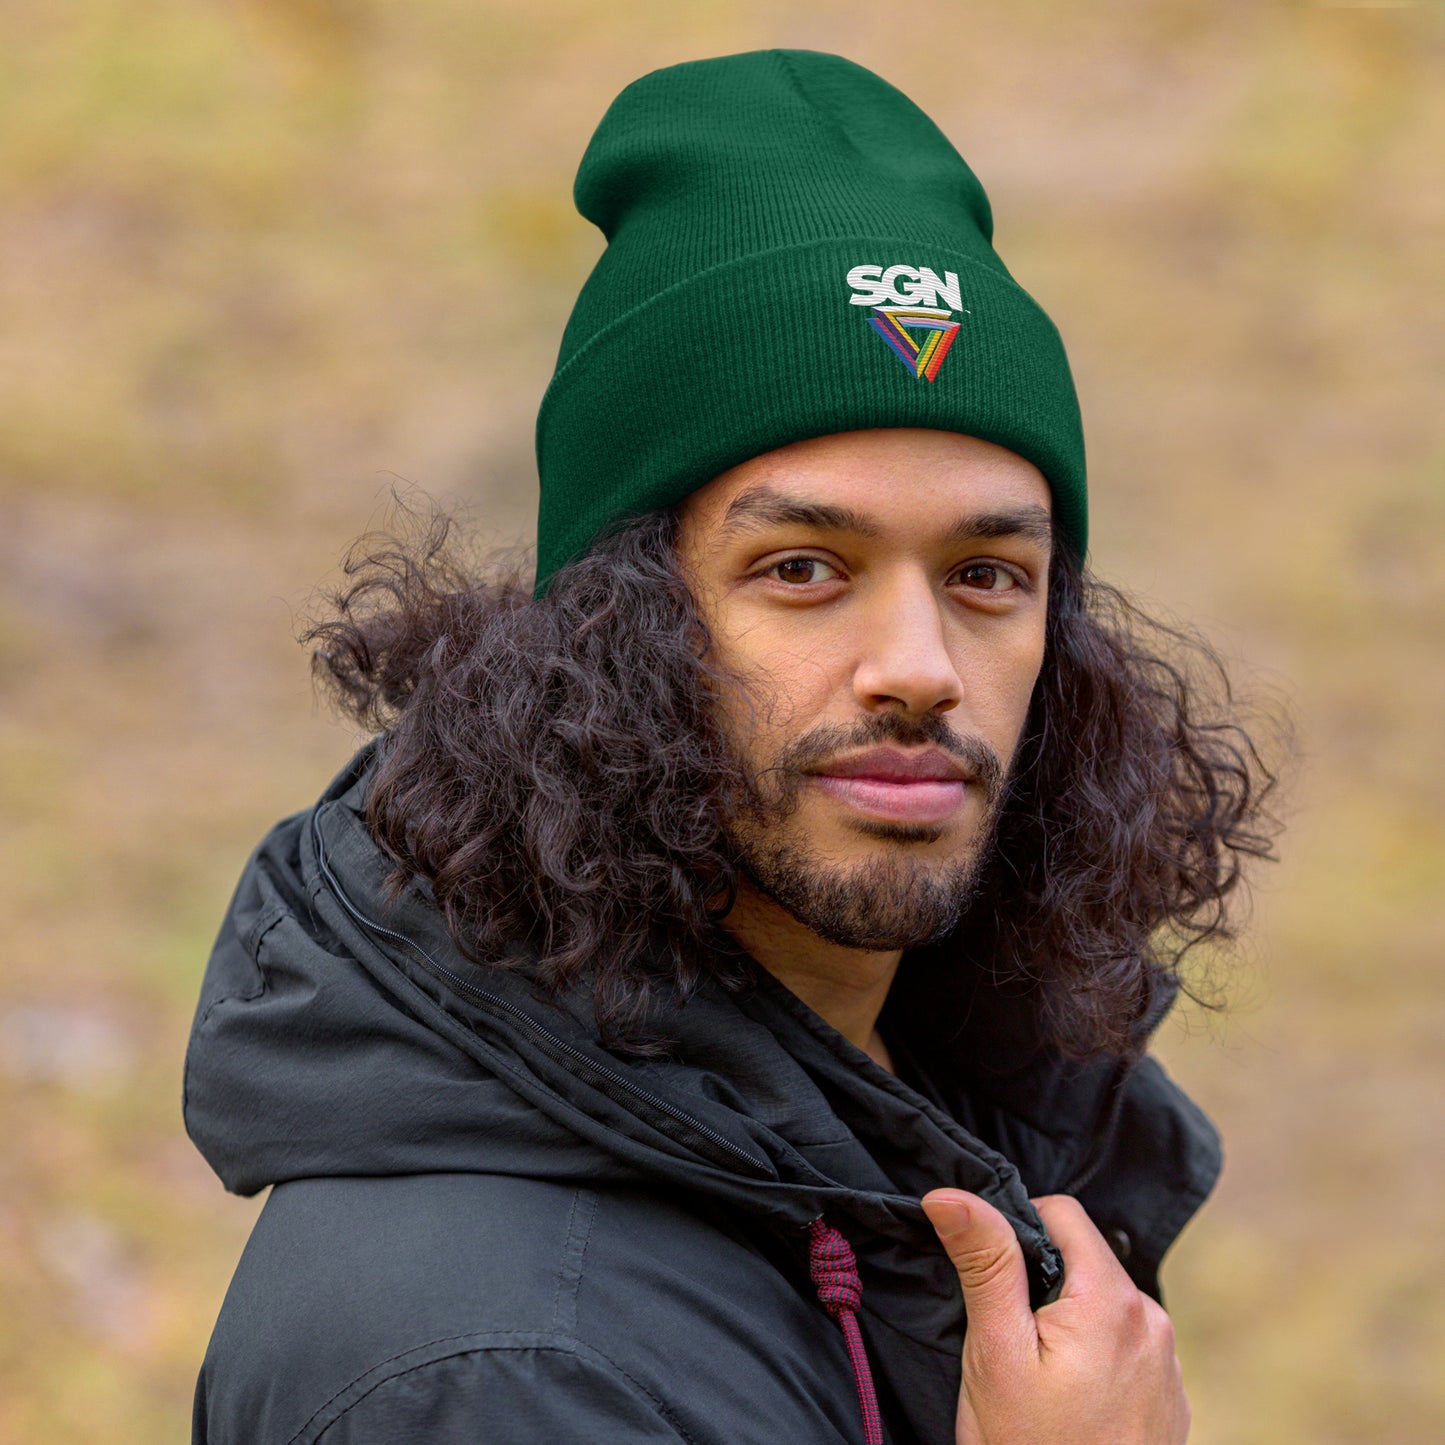 Cuffed SGN Full Color Logo Beanie, Seattle Gay News Knit Hat